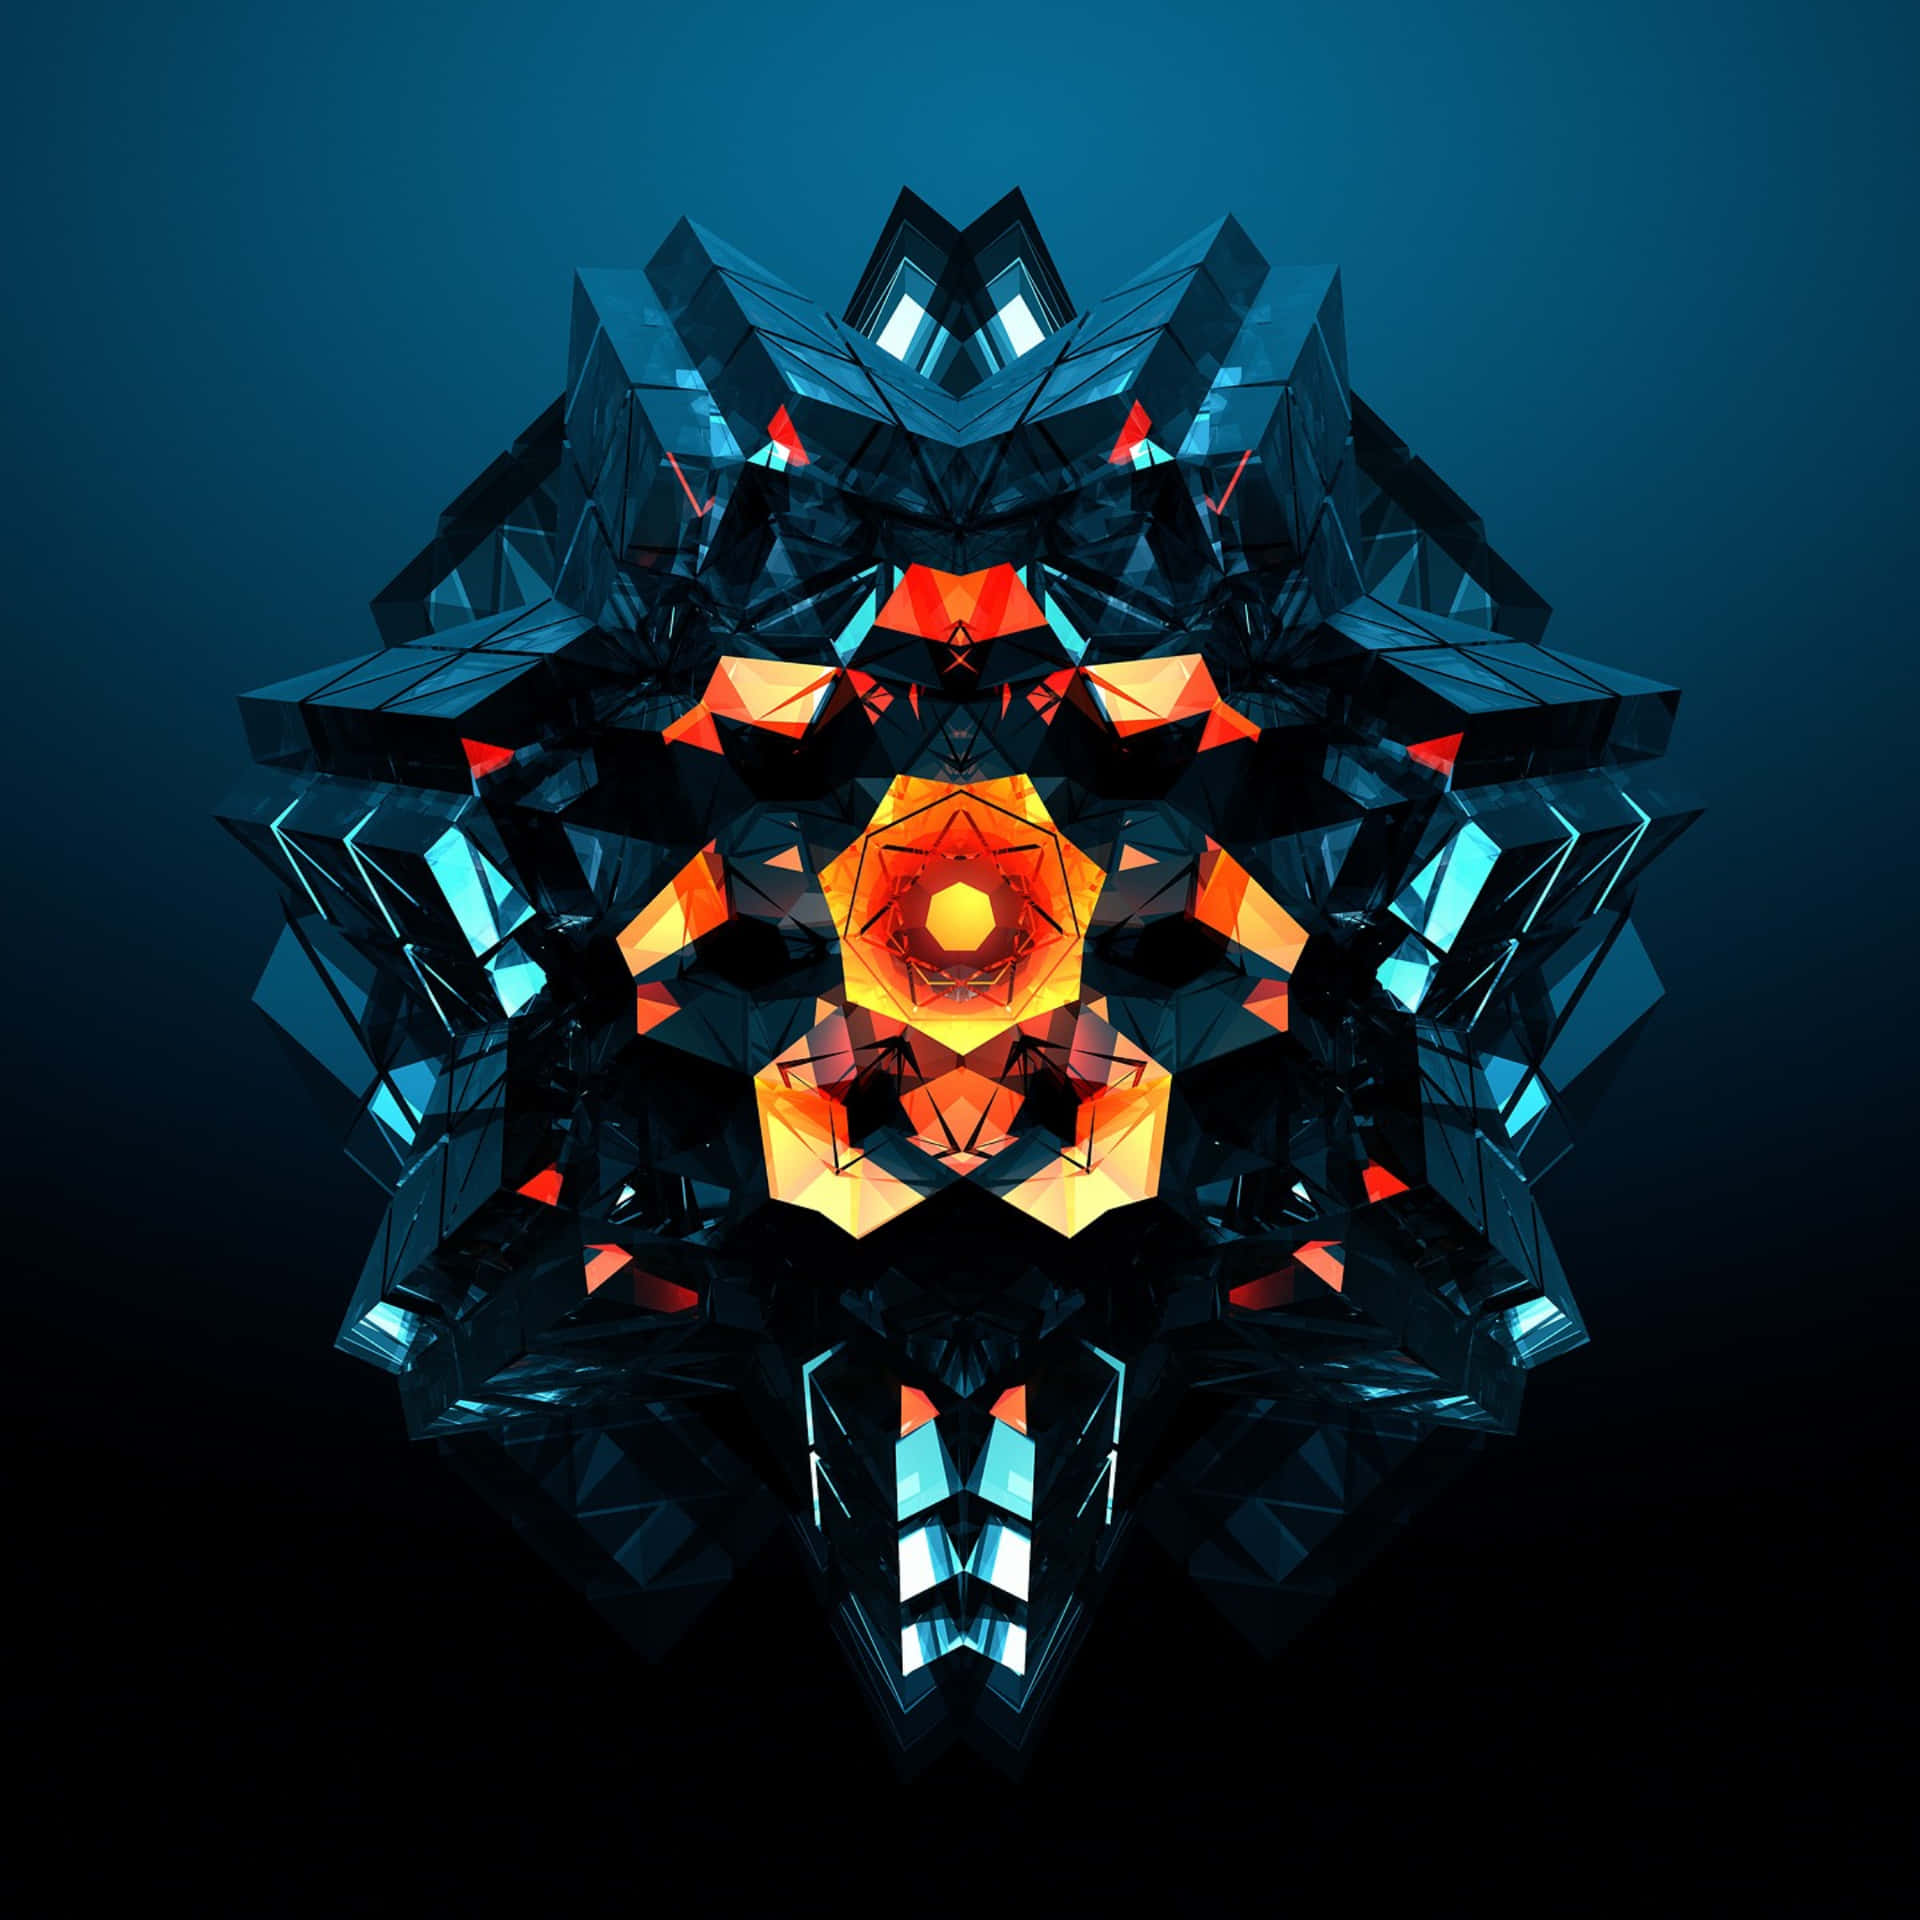 A Geometric Design With Orange And Blue Lights Background